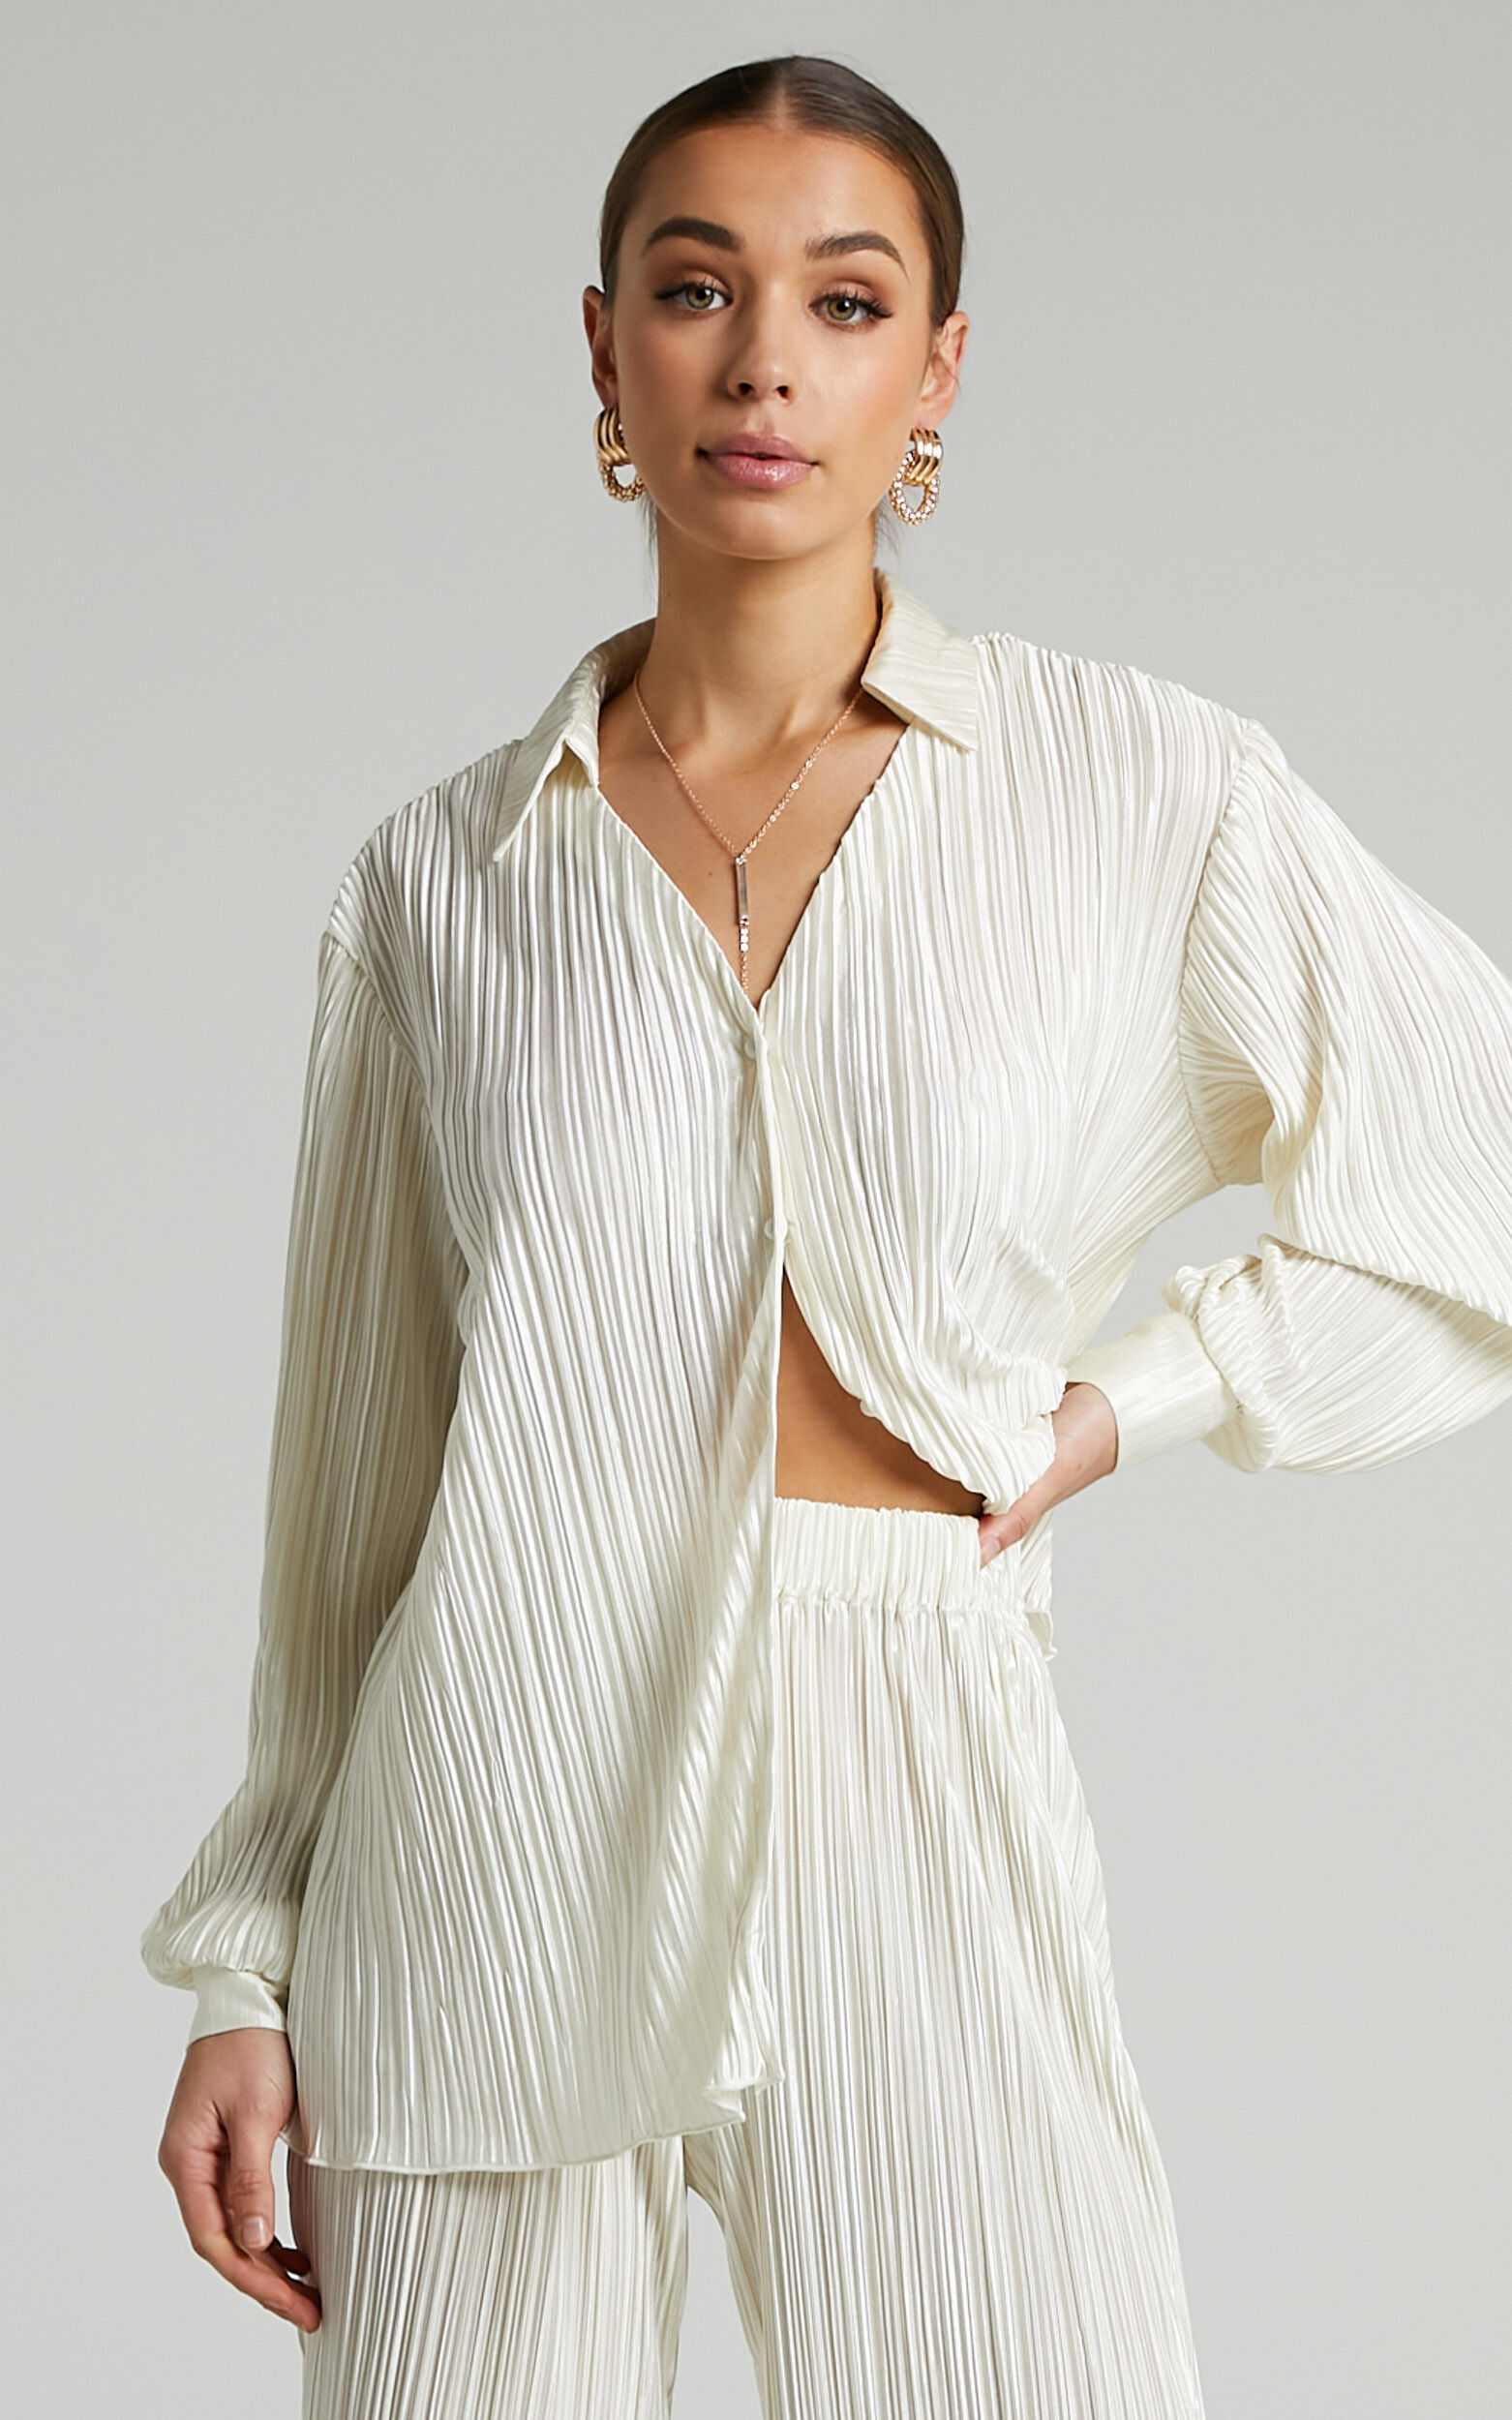 Beca Plisse Button up Shirt in Cream - 06, CRE1, super-hi-res image number null